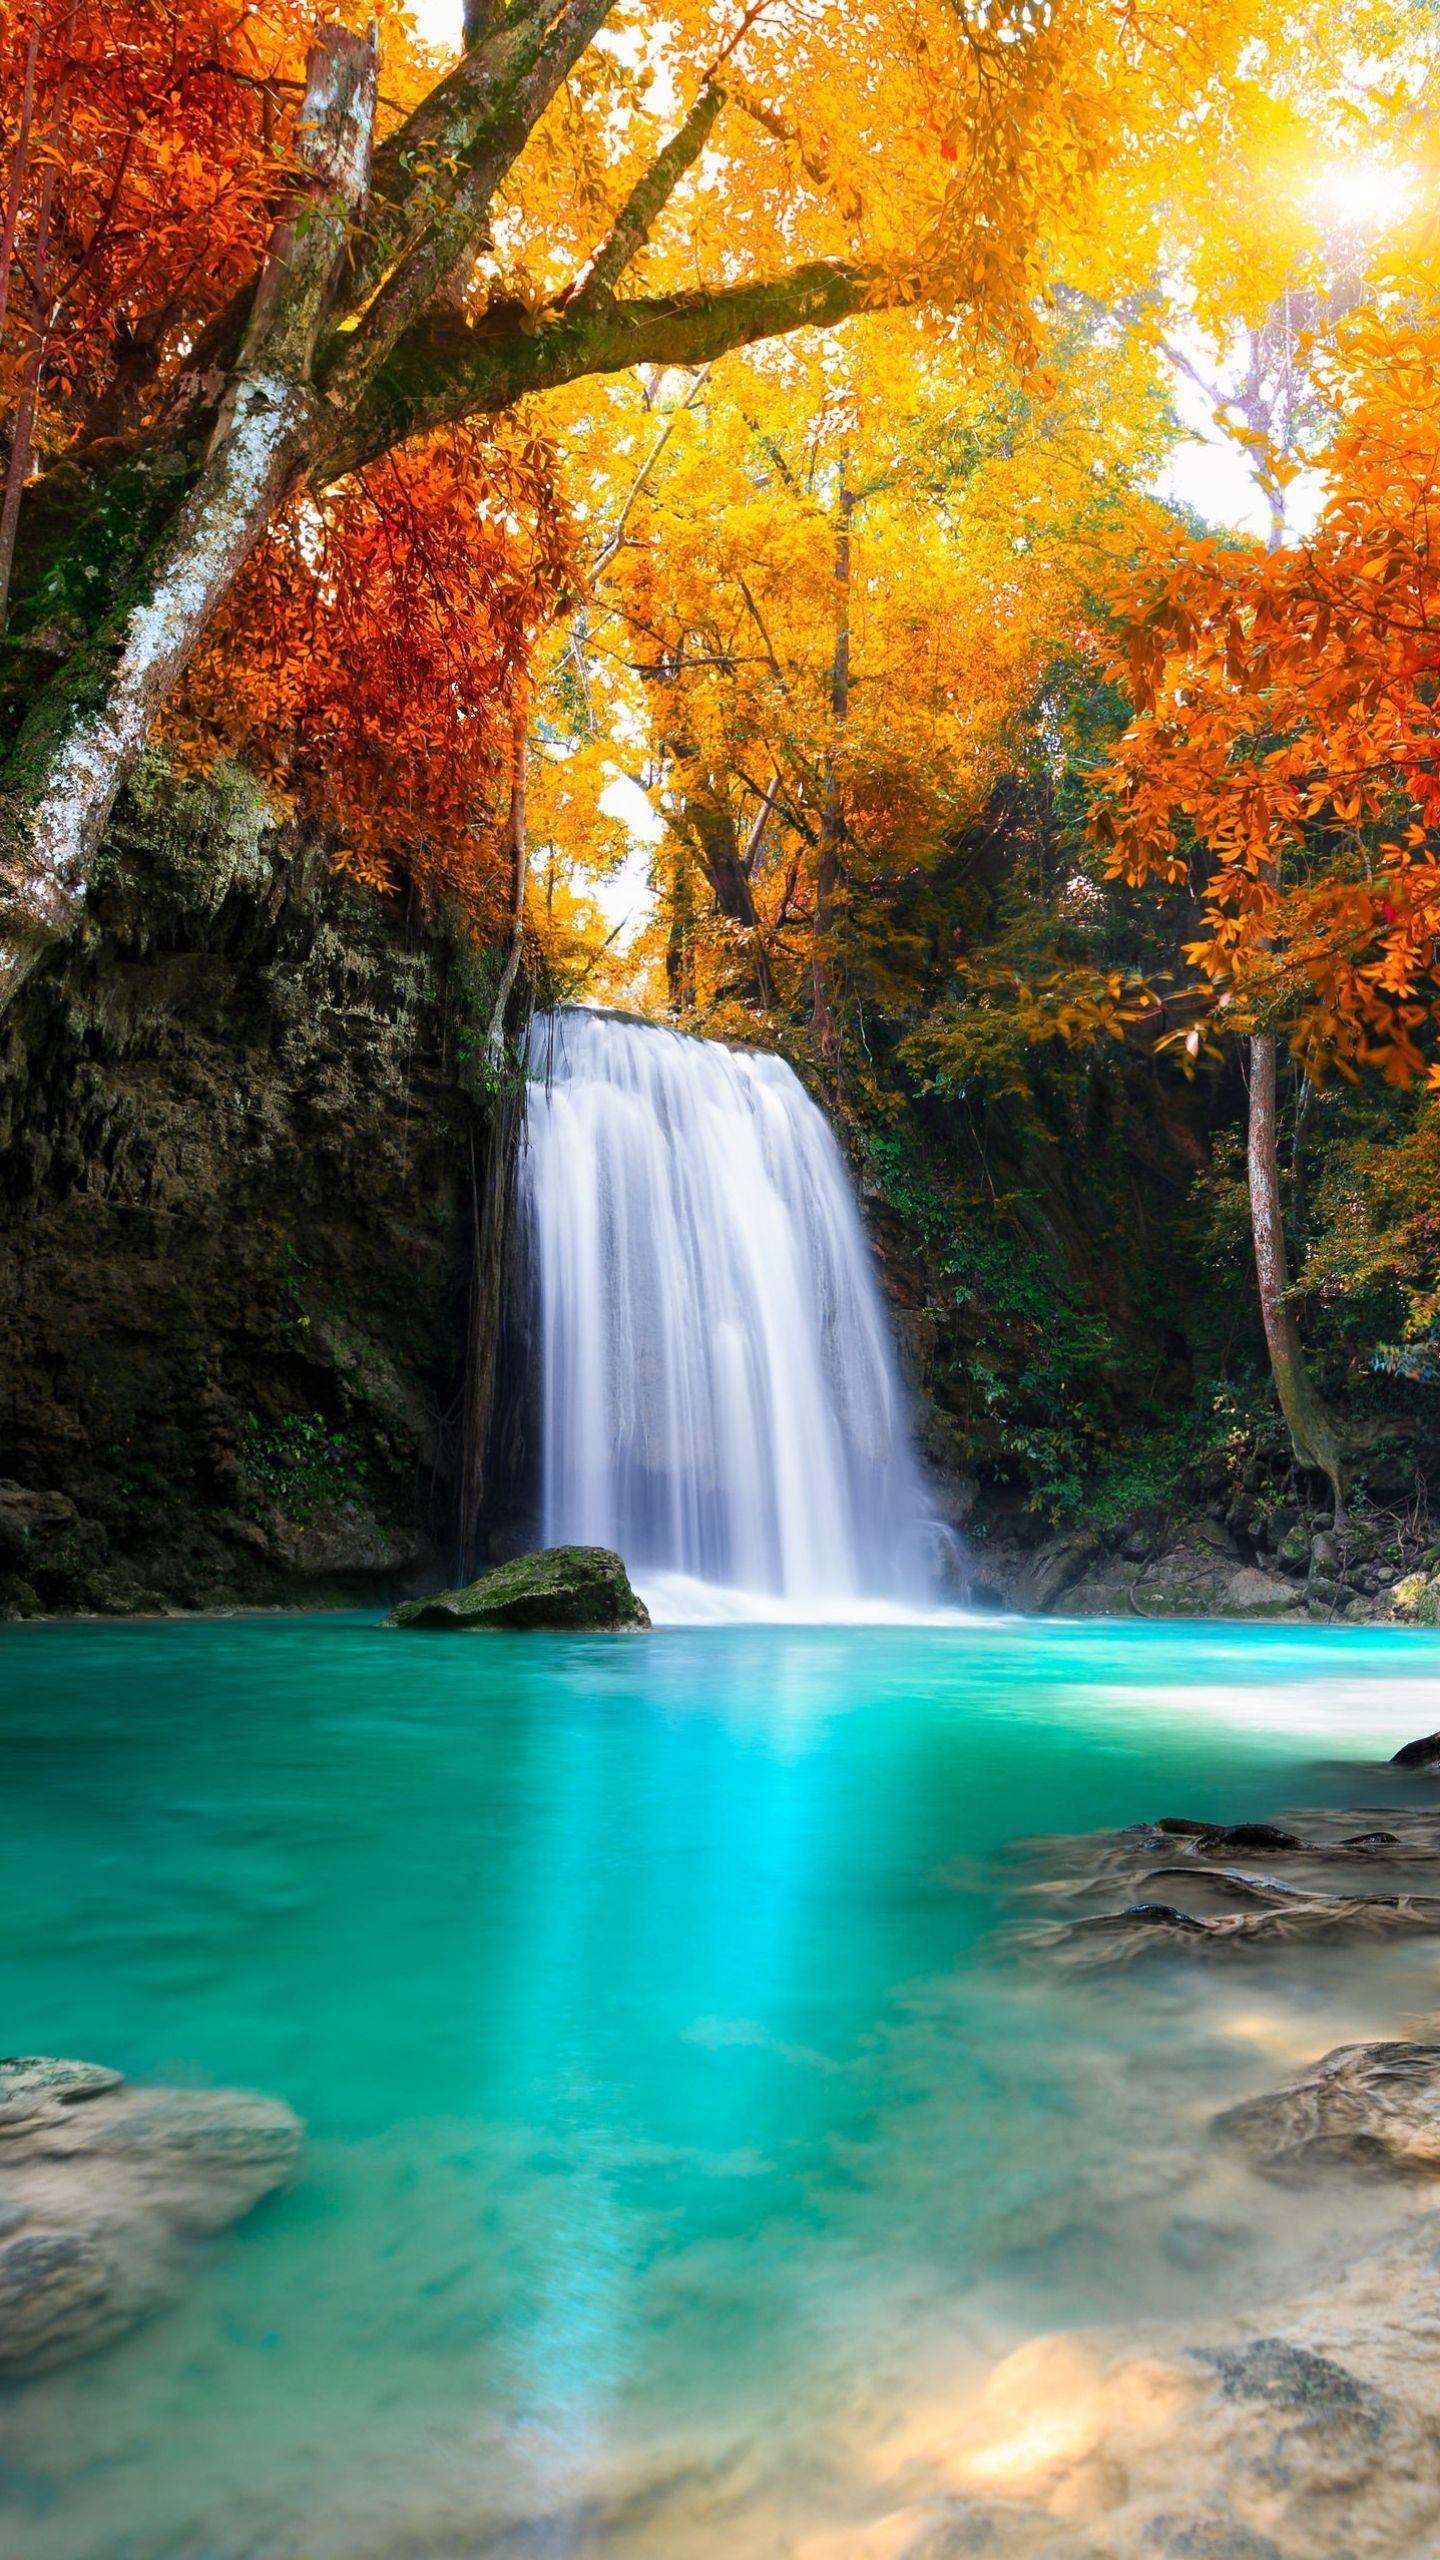 Earth Waterfall HD Wallpapers - Wallpaper Cave